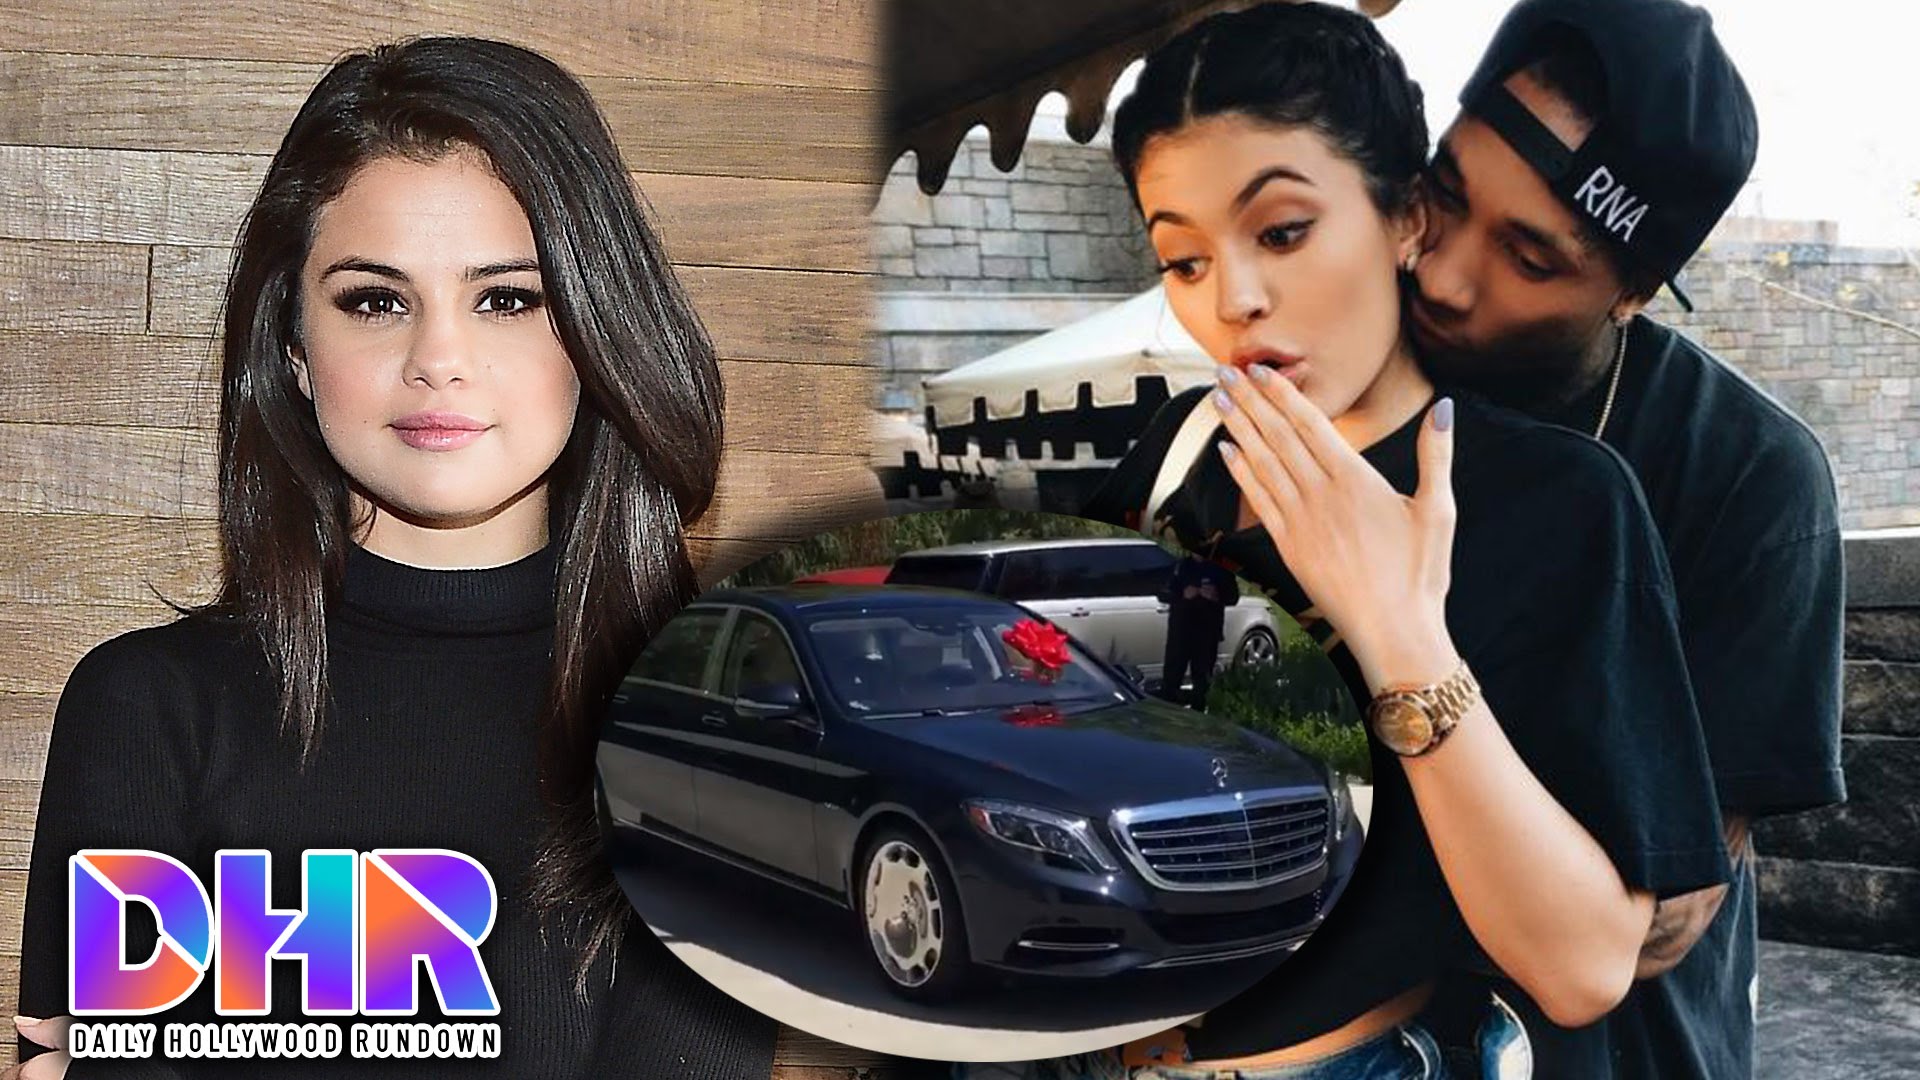 Selena Gomez SHOCKINGLY Quits Hollywood – Kylie Watches Tyga’s Car Get Repossessed (DHR)